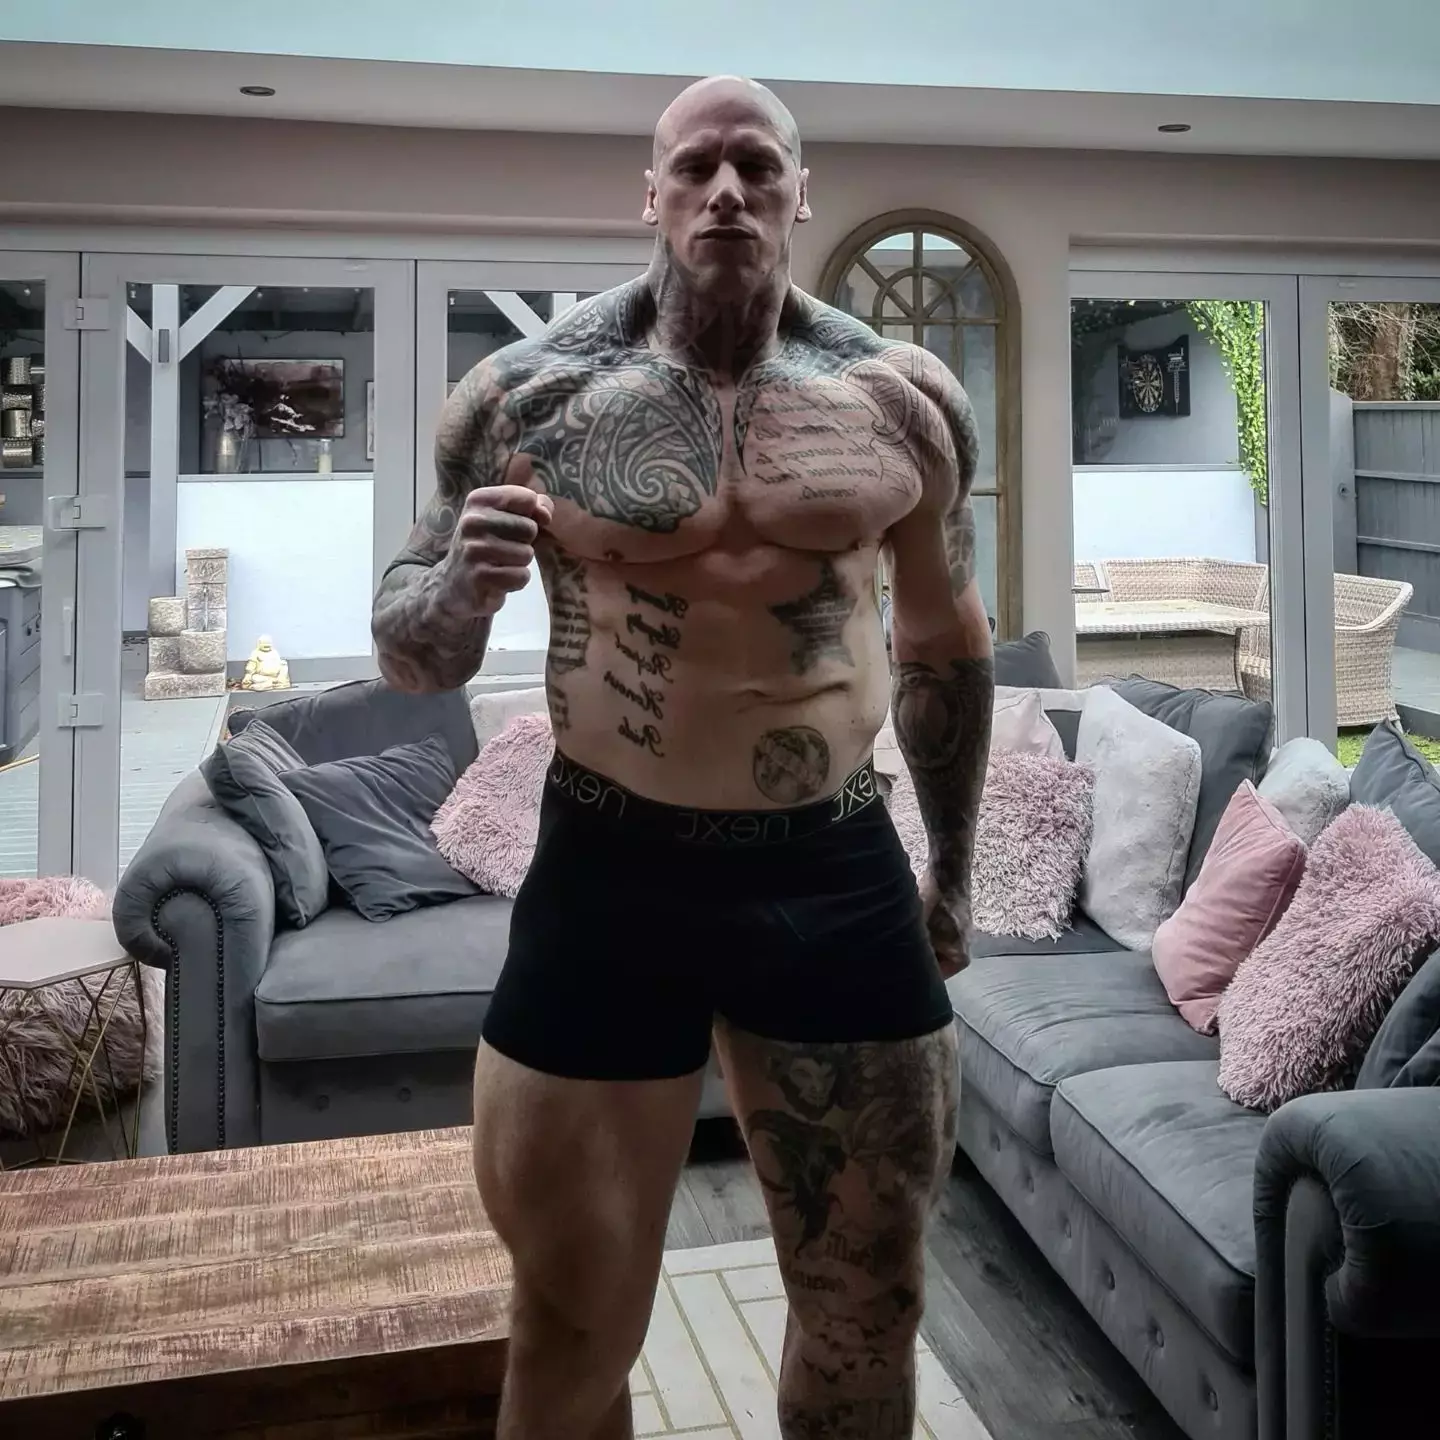 They don't call Martyn Ford the 'World's Scariest Man' for nothing.